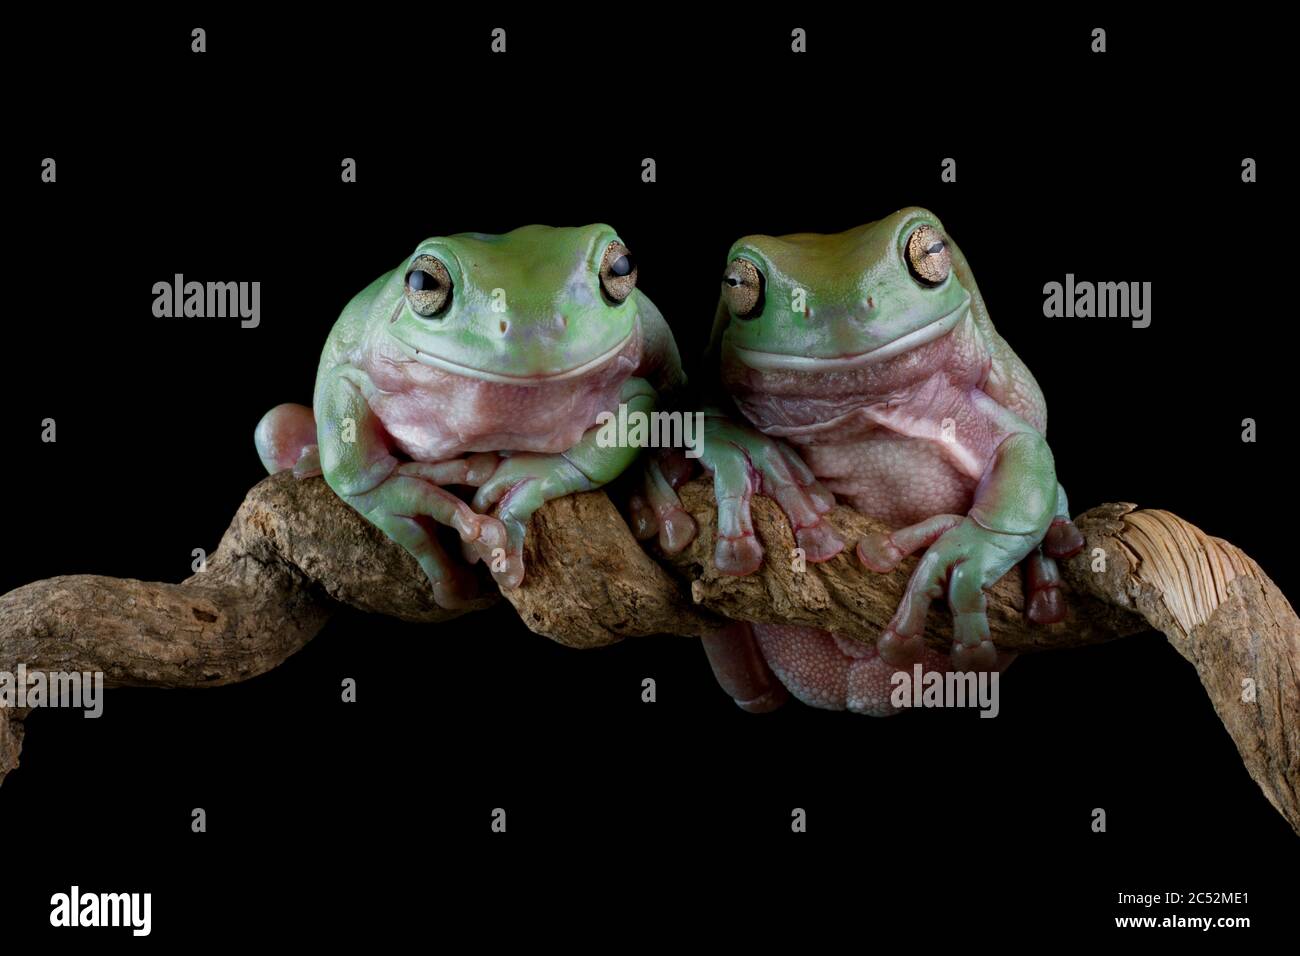 Two Australian Tree frogs on a branch, Indonesia Stock Photo